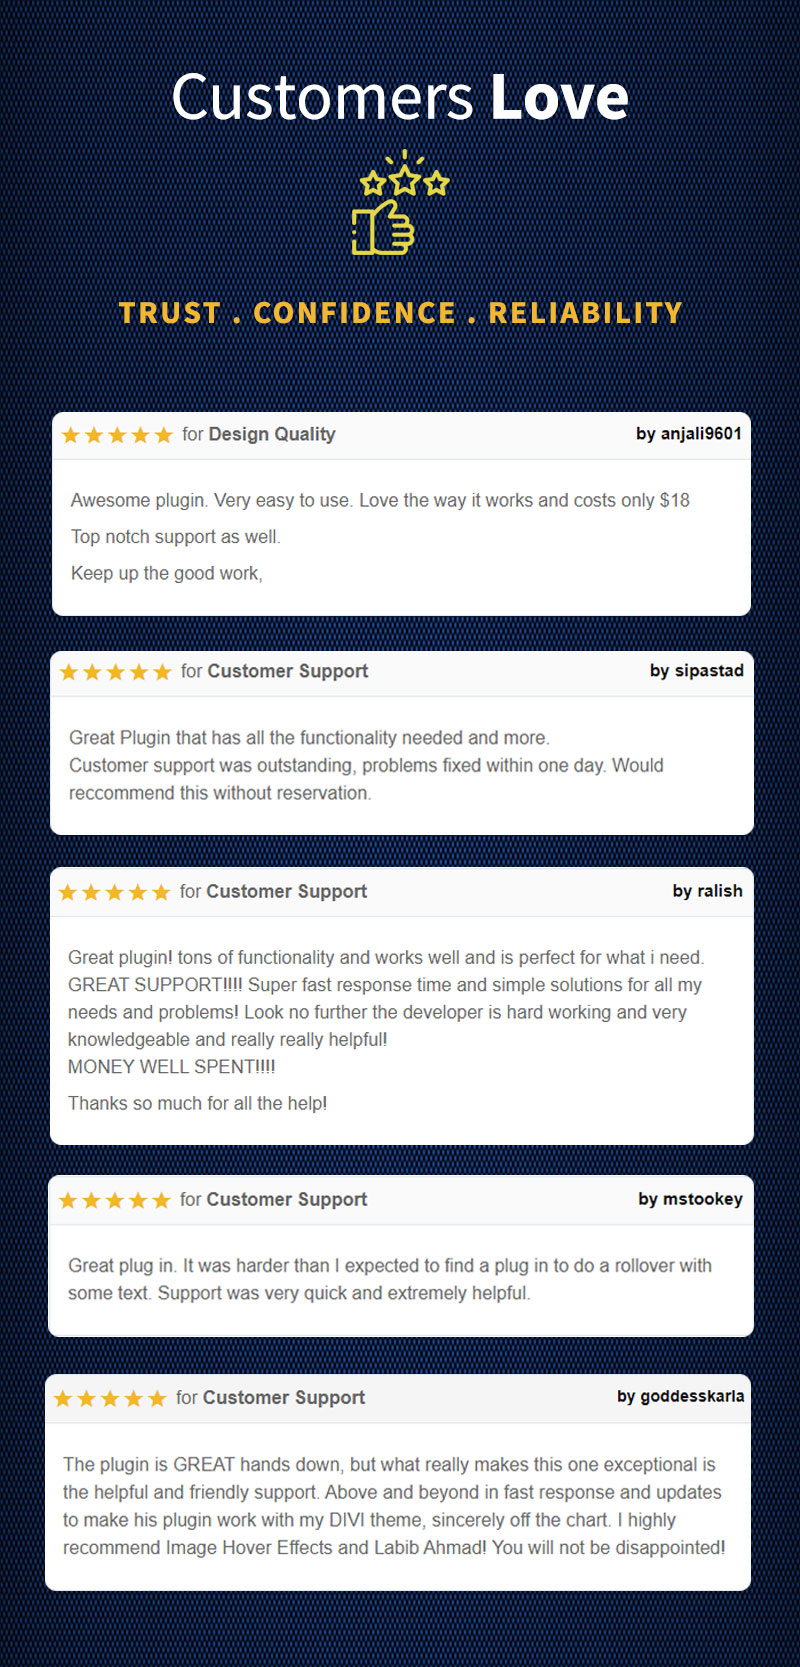 Image Hover Effect Plugin Reviews